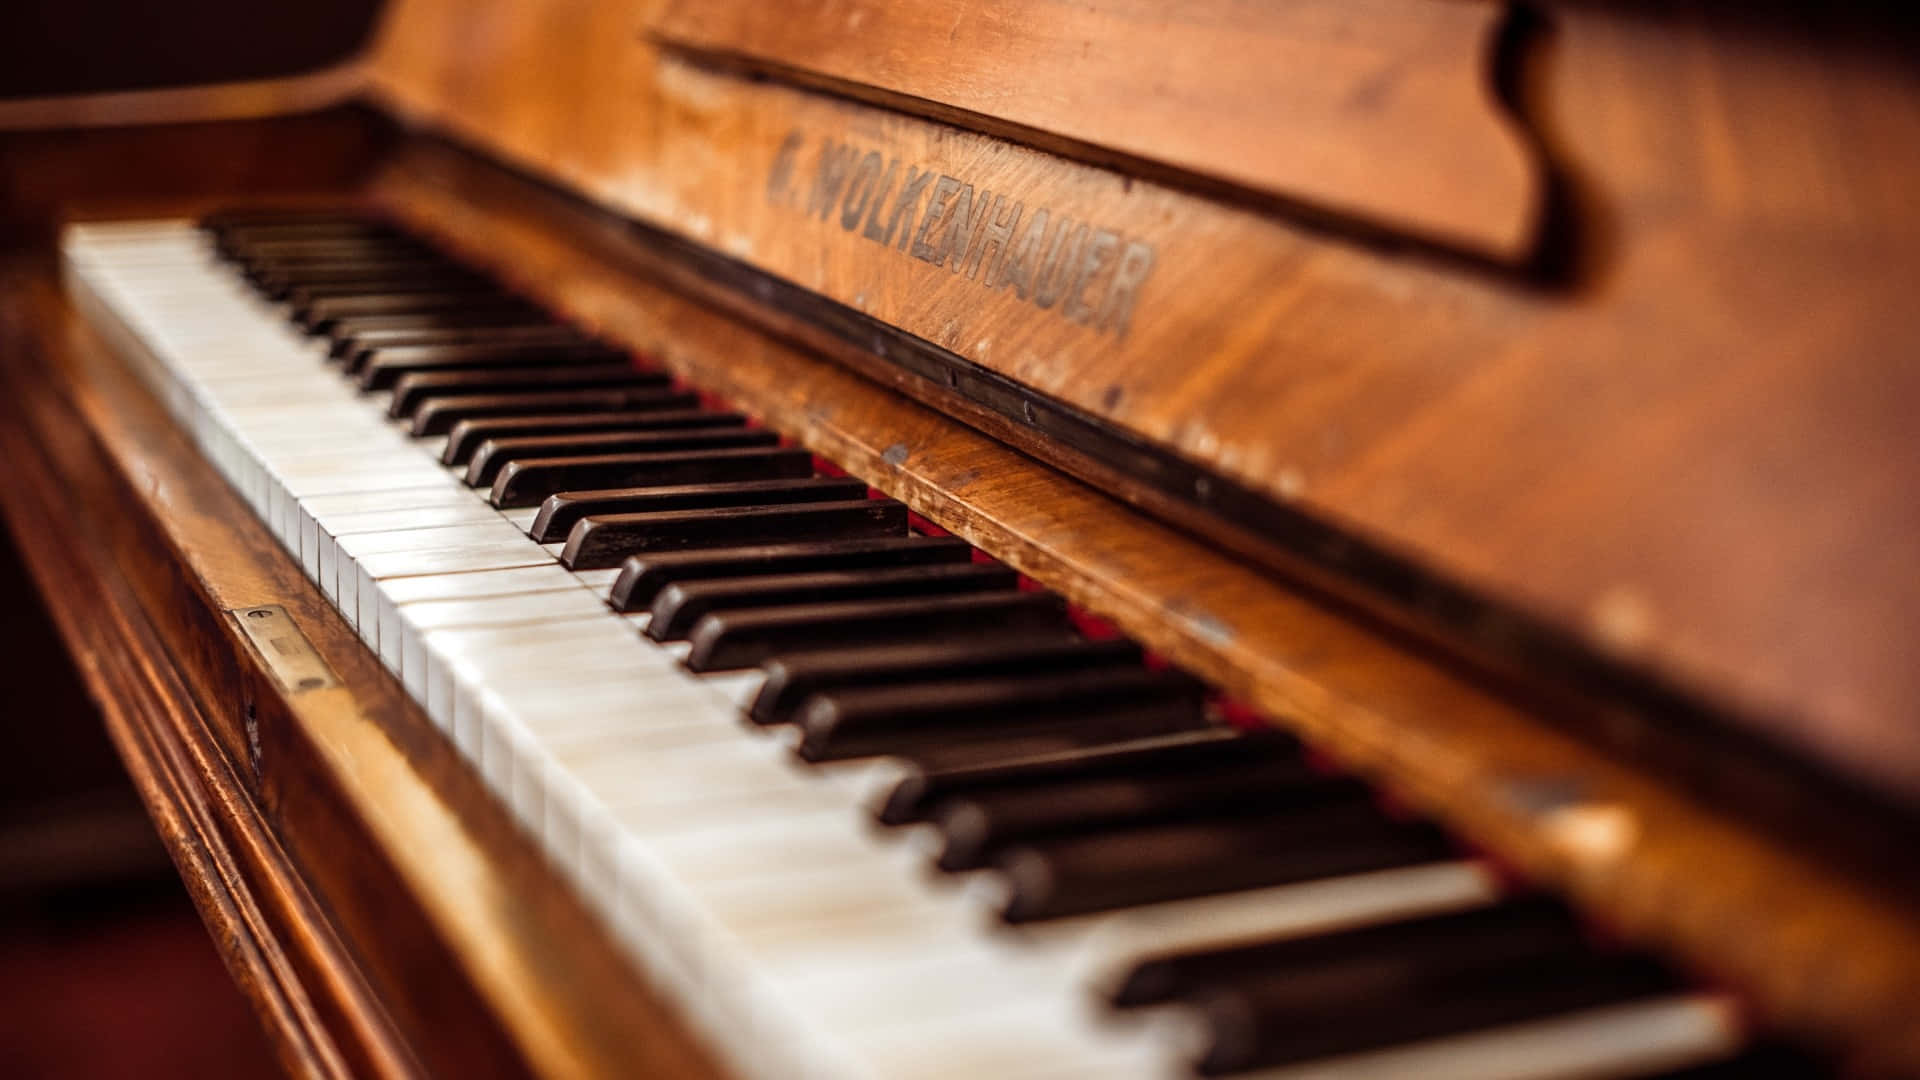 Listen to the musical notes of the beautiful piano